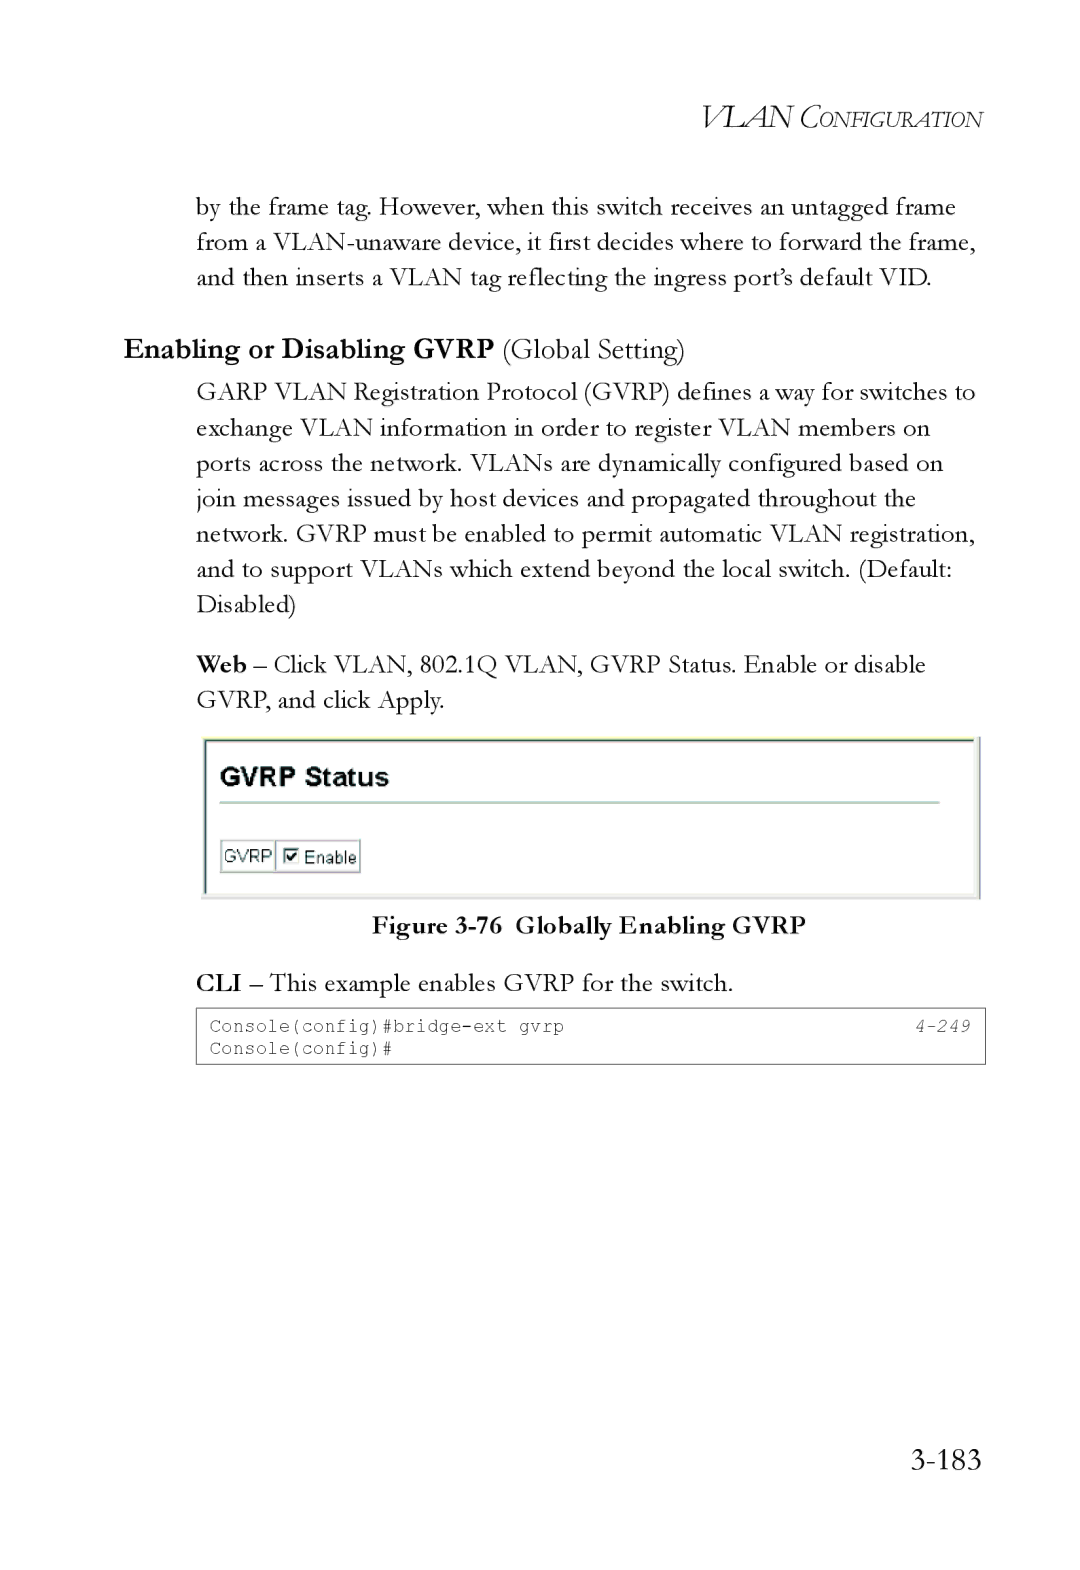 SMC Networks SMC6824M manual 183, Enabling or Disabling Gvrp Global Setting, CLI This example enables Gvrp for the switch 